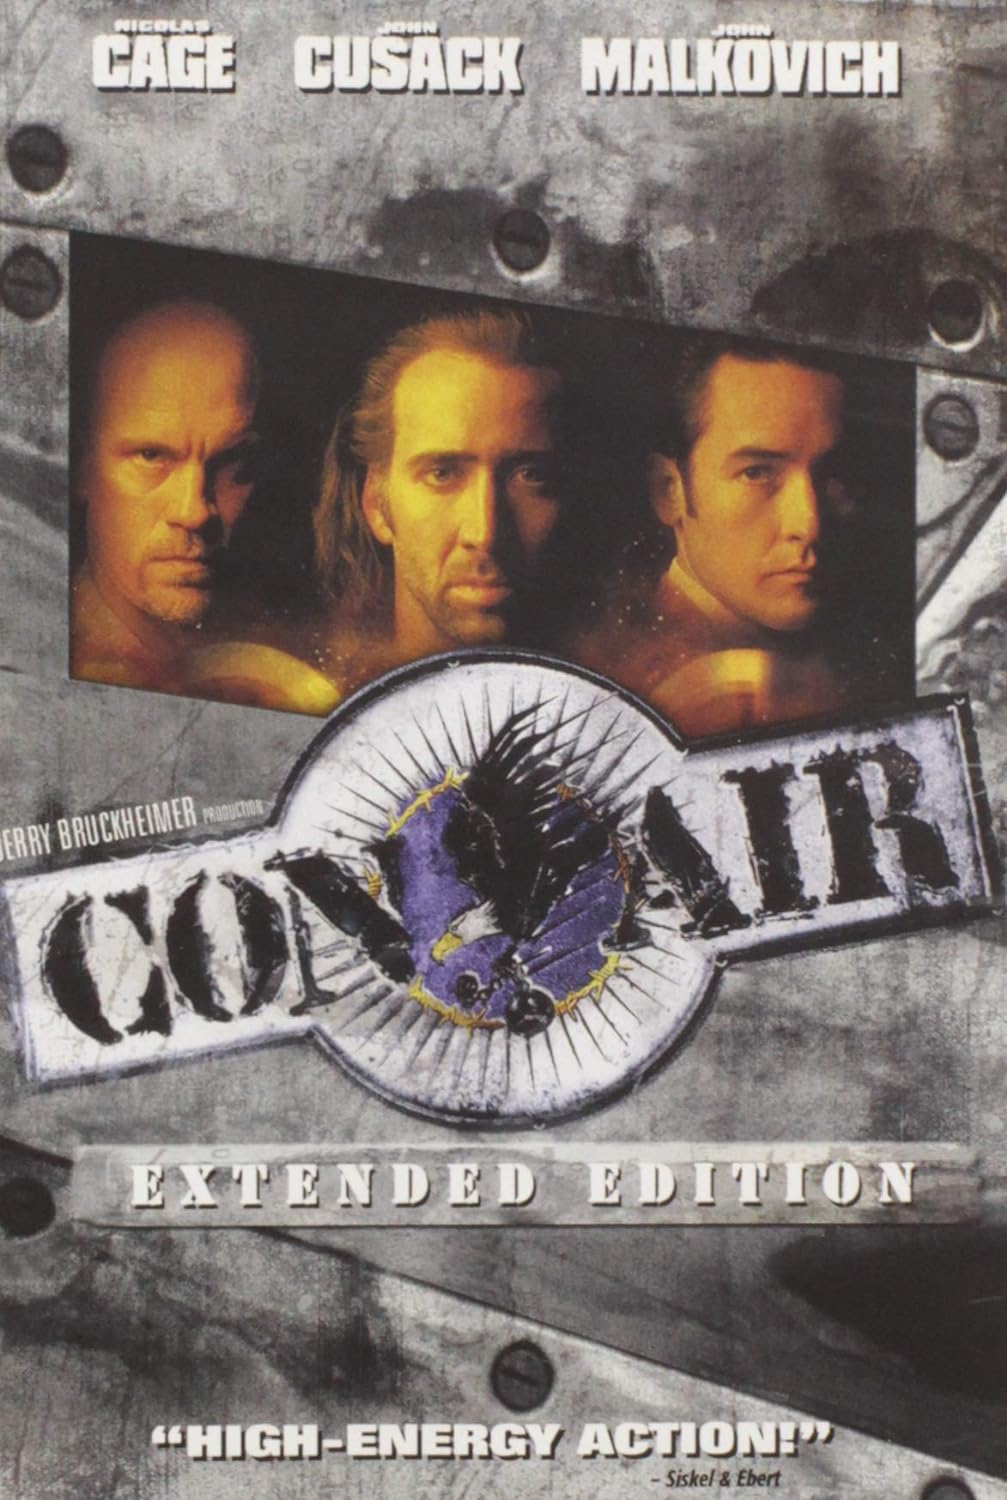 Con Air (1997) Unrated&Extended Edition 448Kbps 23.976Fps 48Khz 5.1Ch DVD Turkish Audio TAC